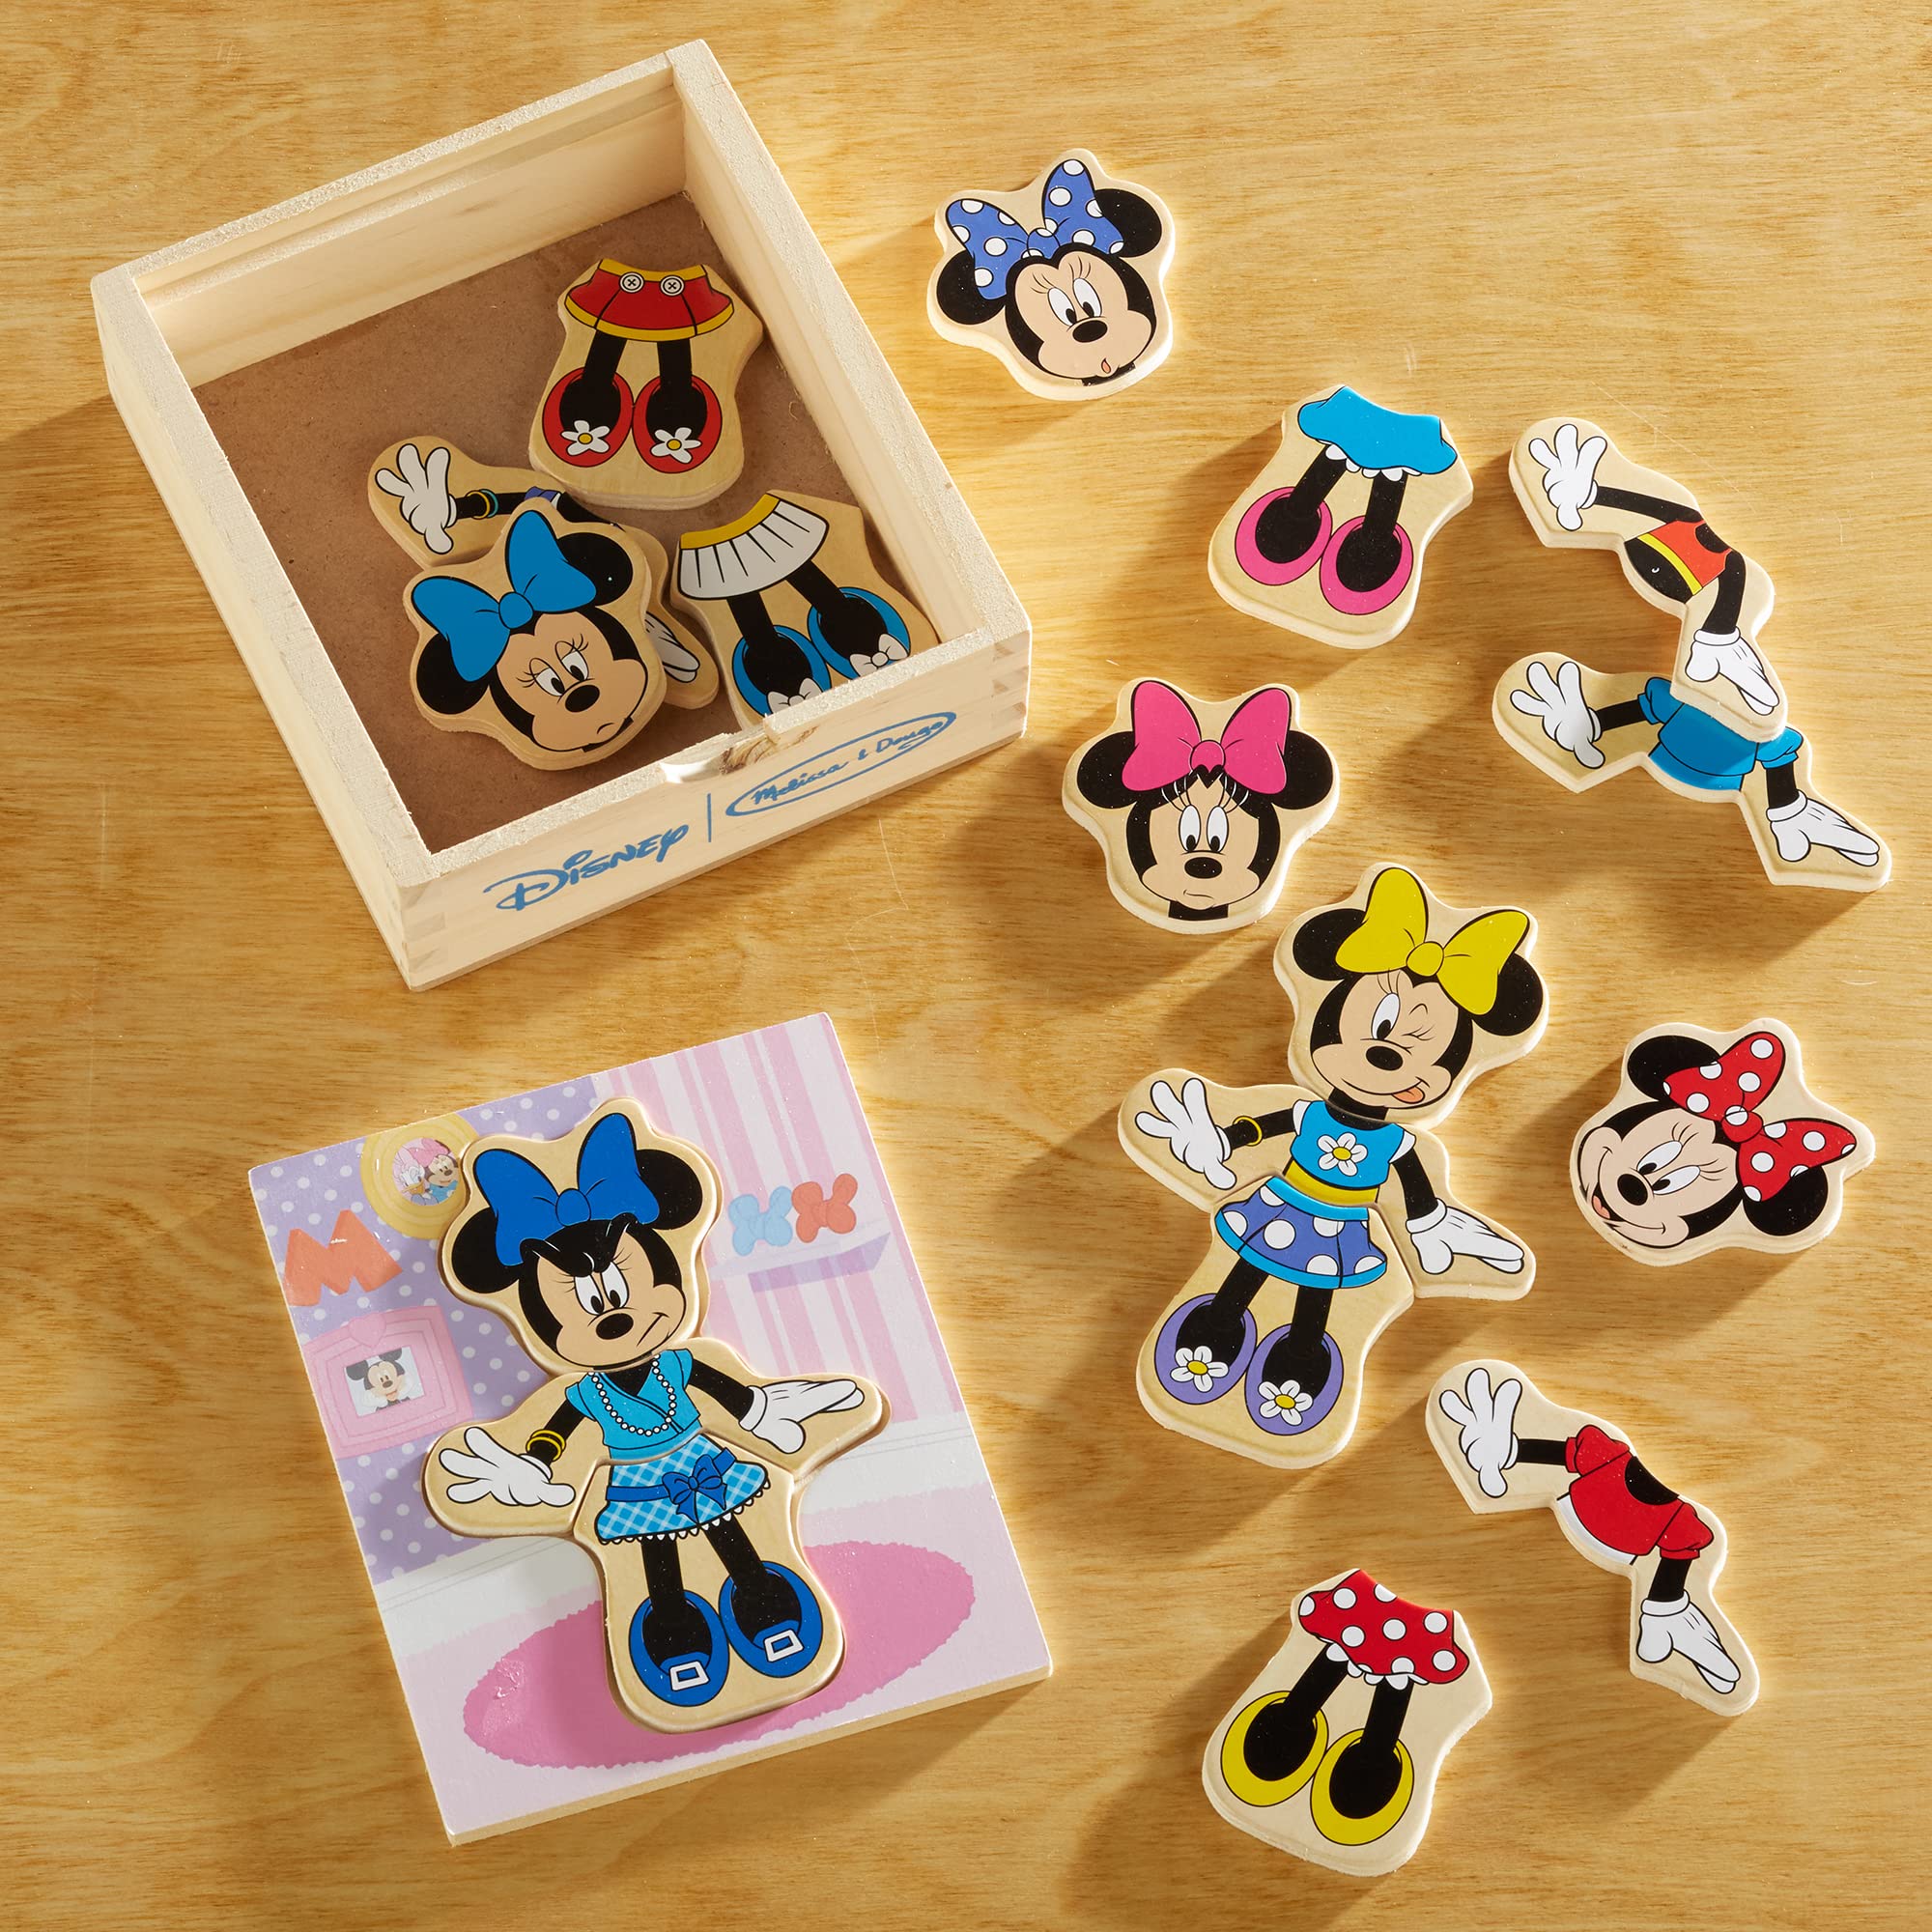 Melissa & Doug Disney Minnie Mouse Mix and Match Dress-Up Wooden Play Set (18 pcs) - Minnie Mouse Toys For Disney Fans, Minnie Mouse Fashion Puzzle Toy, Travel Toys For Kids Ages 3+